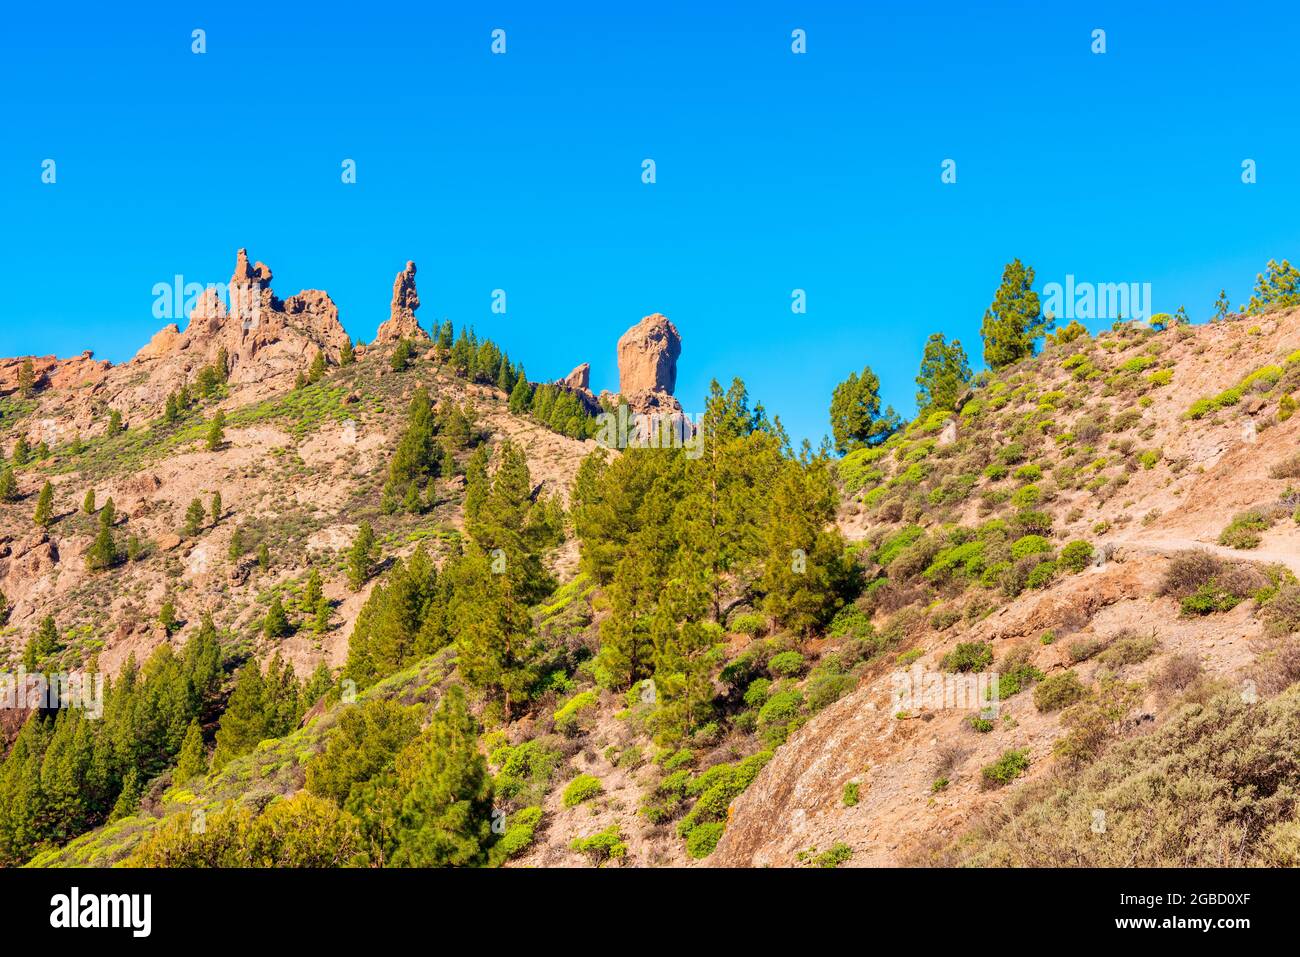 Footpath towards Roque Nublo on Gran Canaria, Canary Islands, Spain. Roque Nublo is a 67 meter tall monolith, very popular with tourists Stock Photo